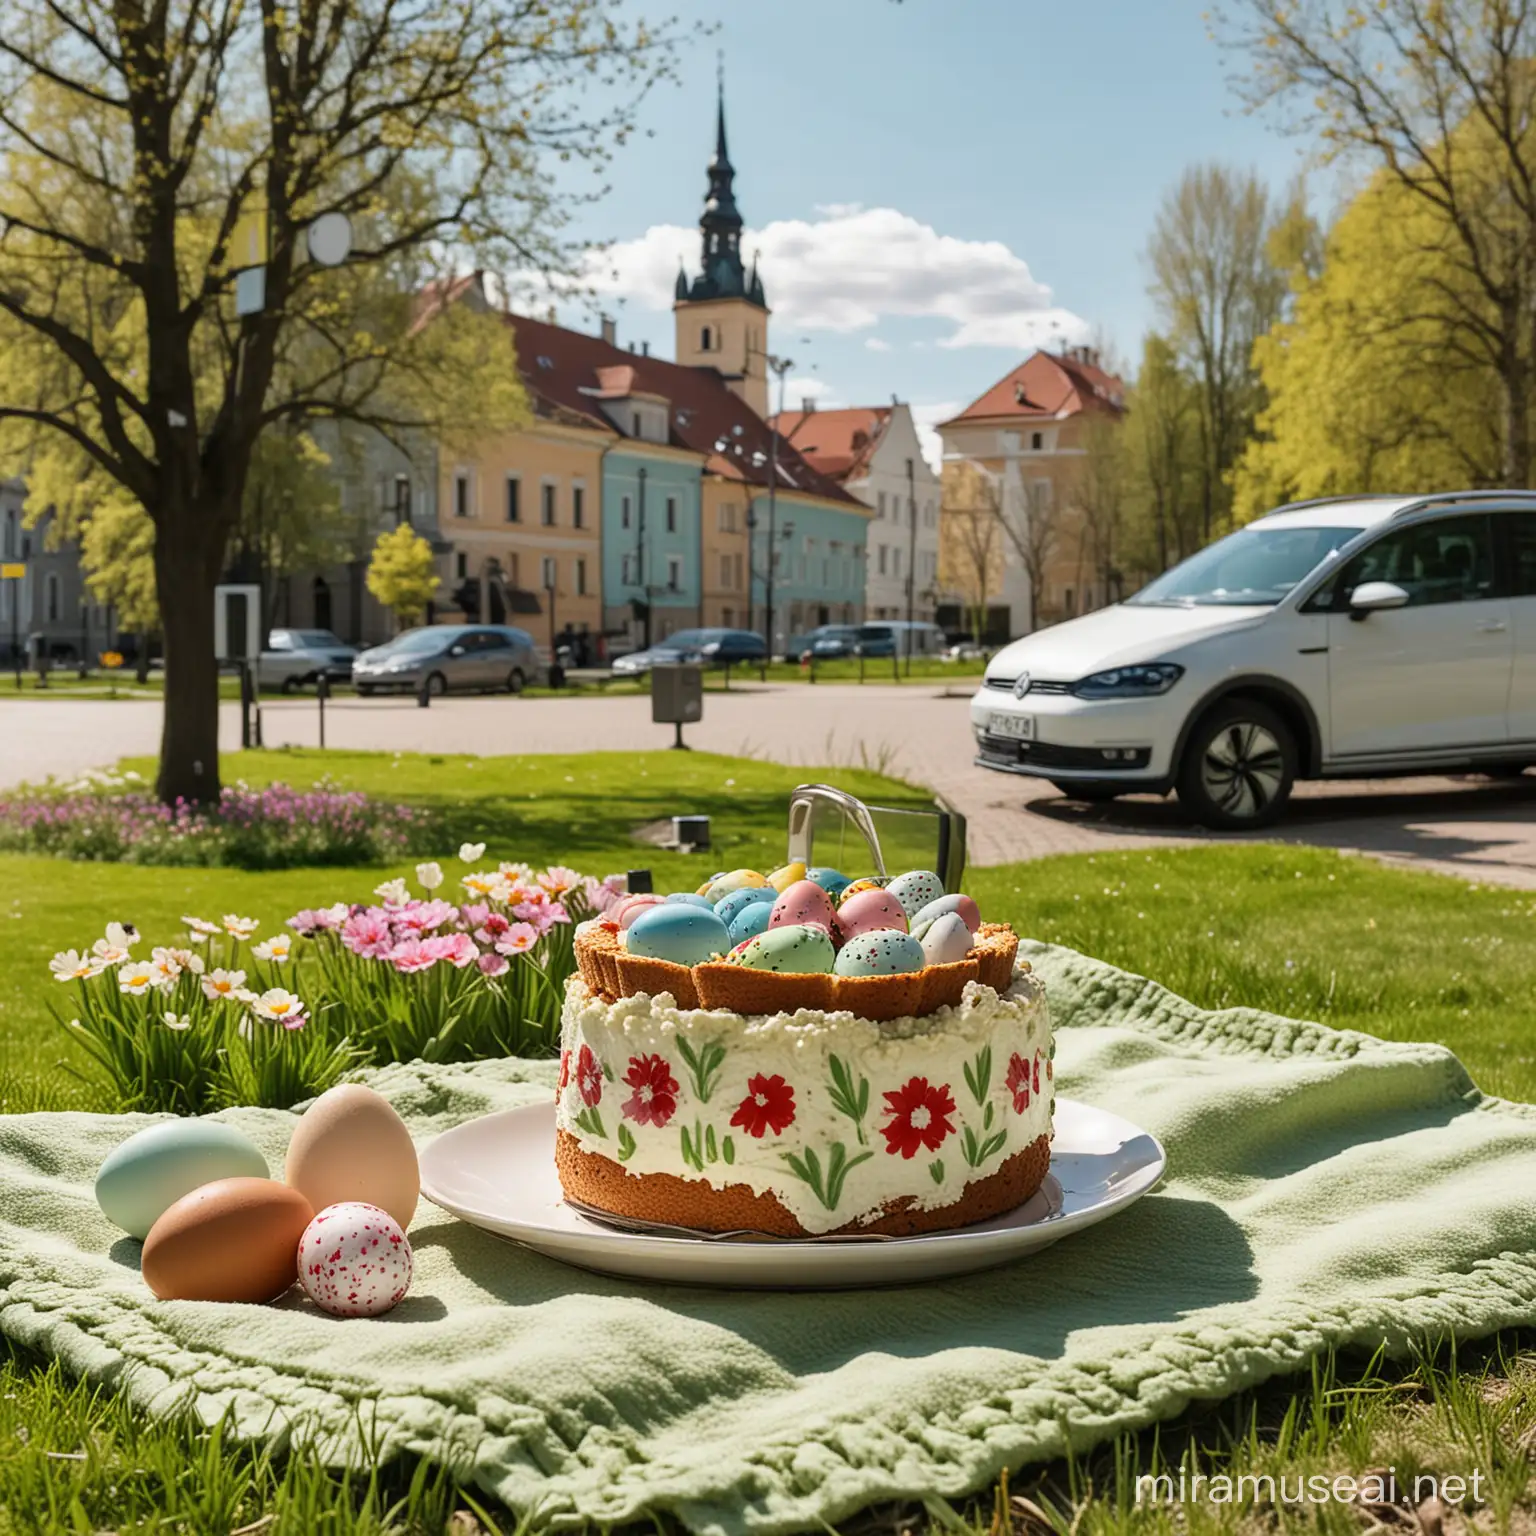 Easter Celebration in Vilnius Park with Electric Vehicle